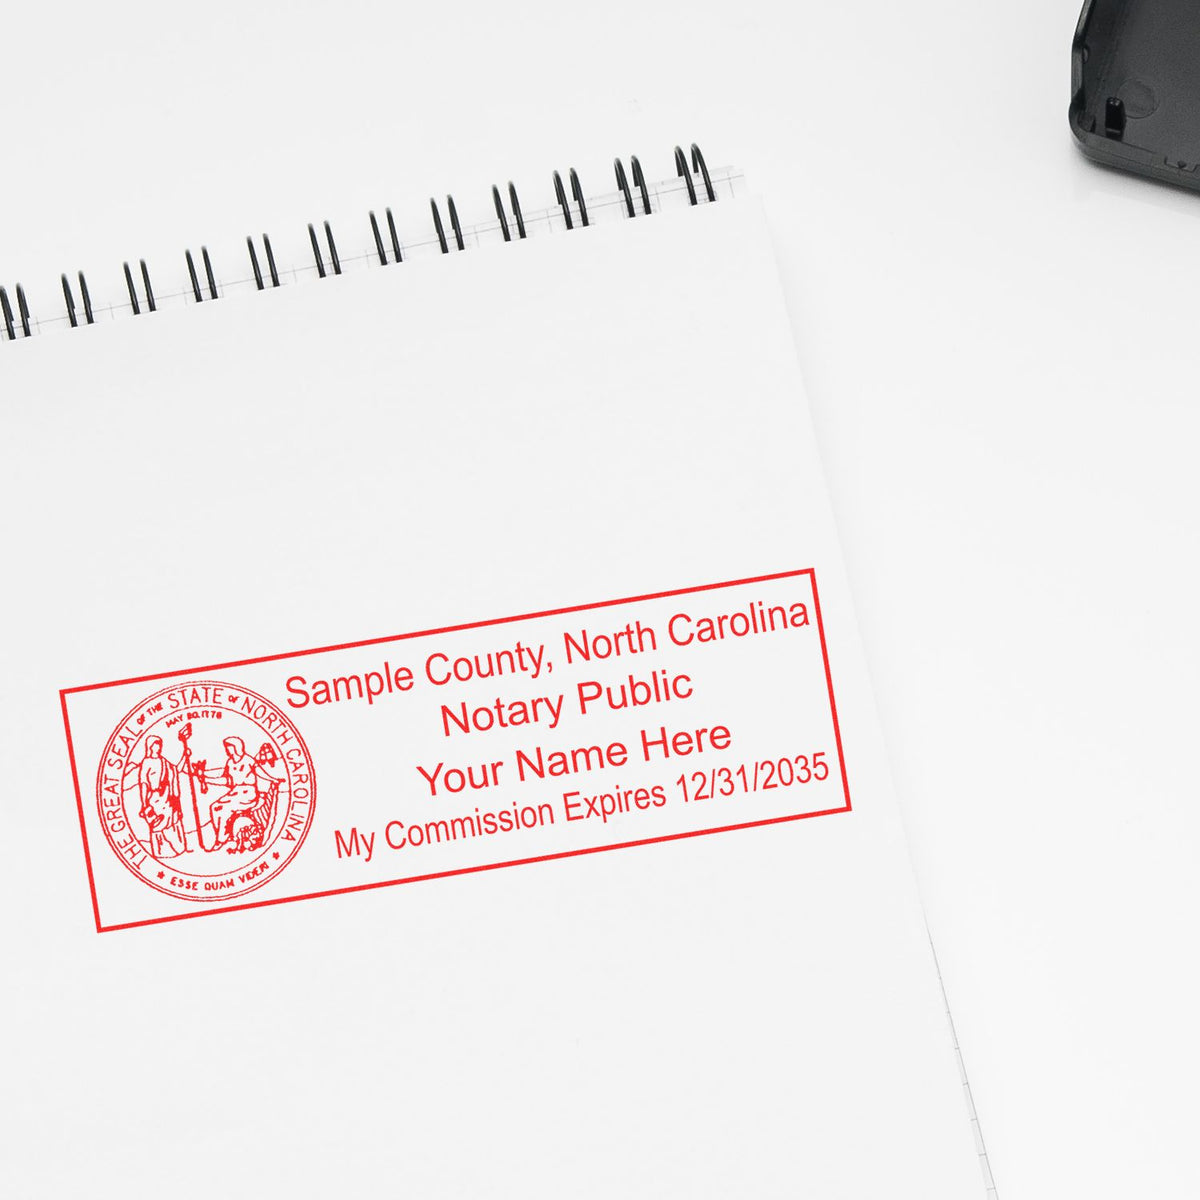 Another Example of a stamped impression of the Super Slim North Carolina Notary Public Stamp on a piece of office paper.